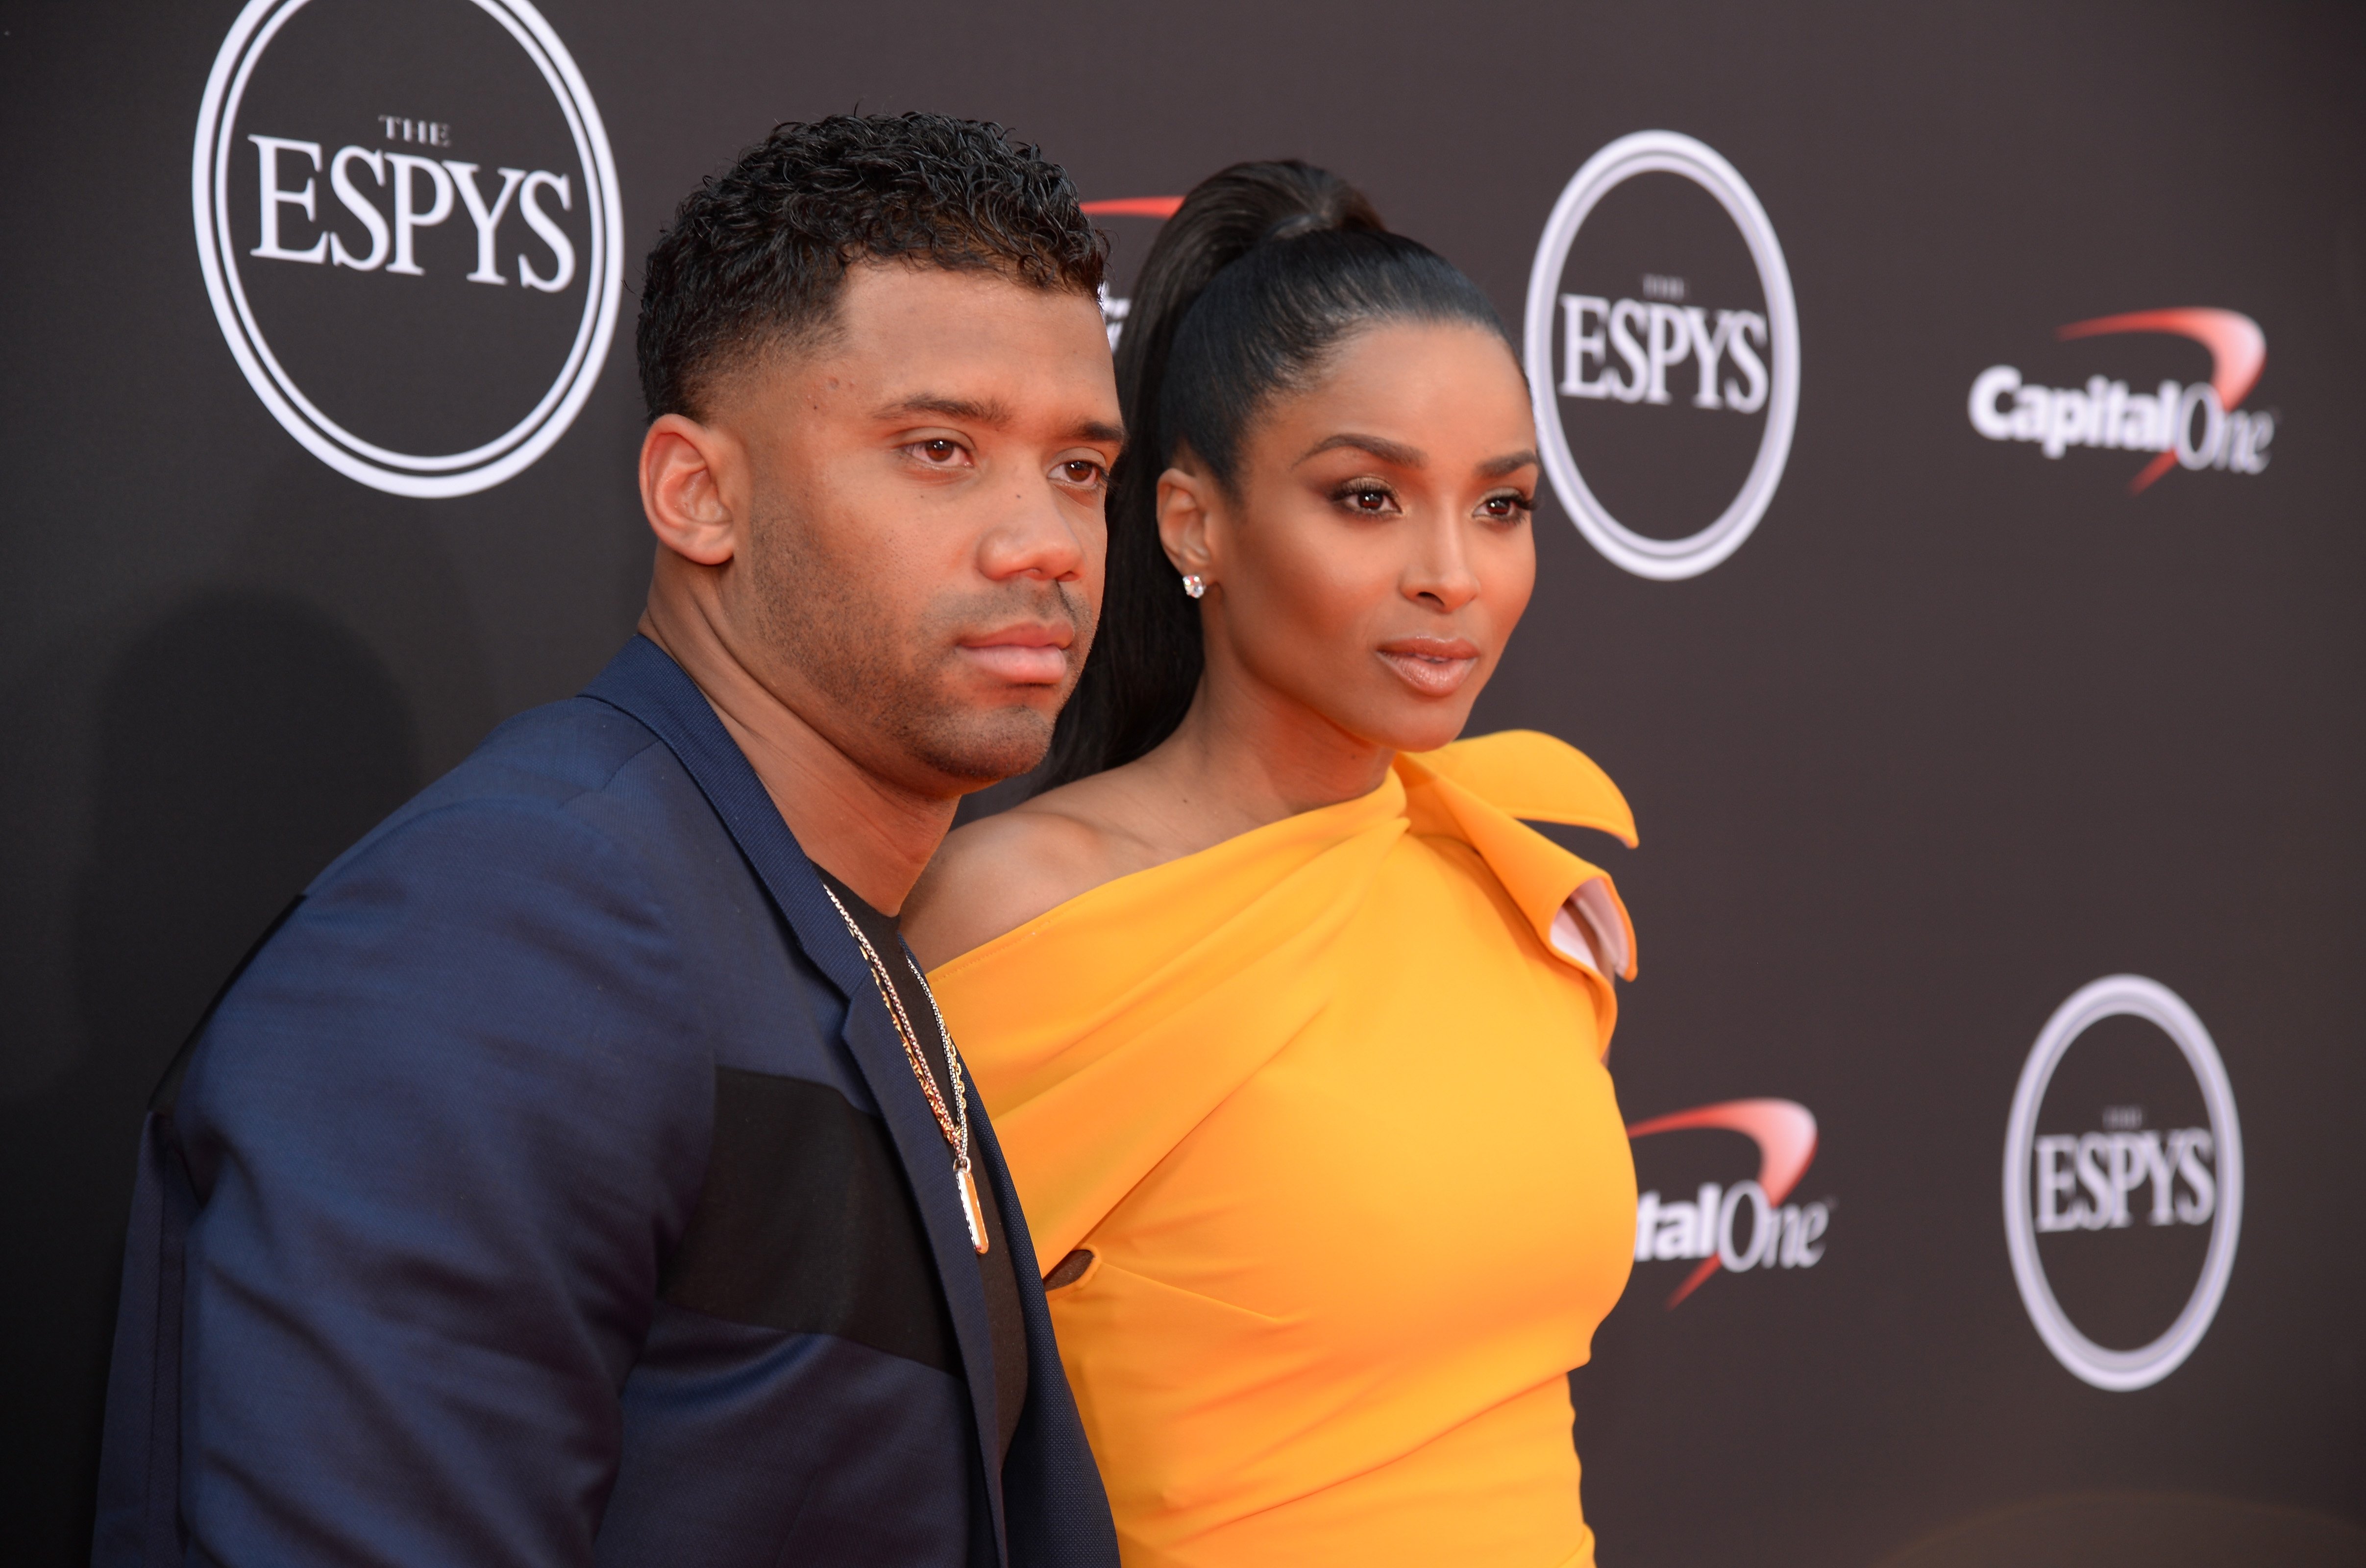 Ciara and Russell Wilson at the ESPY Awards Red Carpet Show at Microsoft Theater on July 18, 2018, in Los Angeles, California | Photo: Getty Images